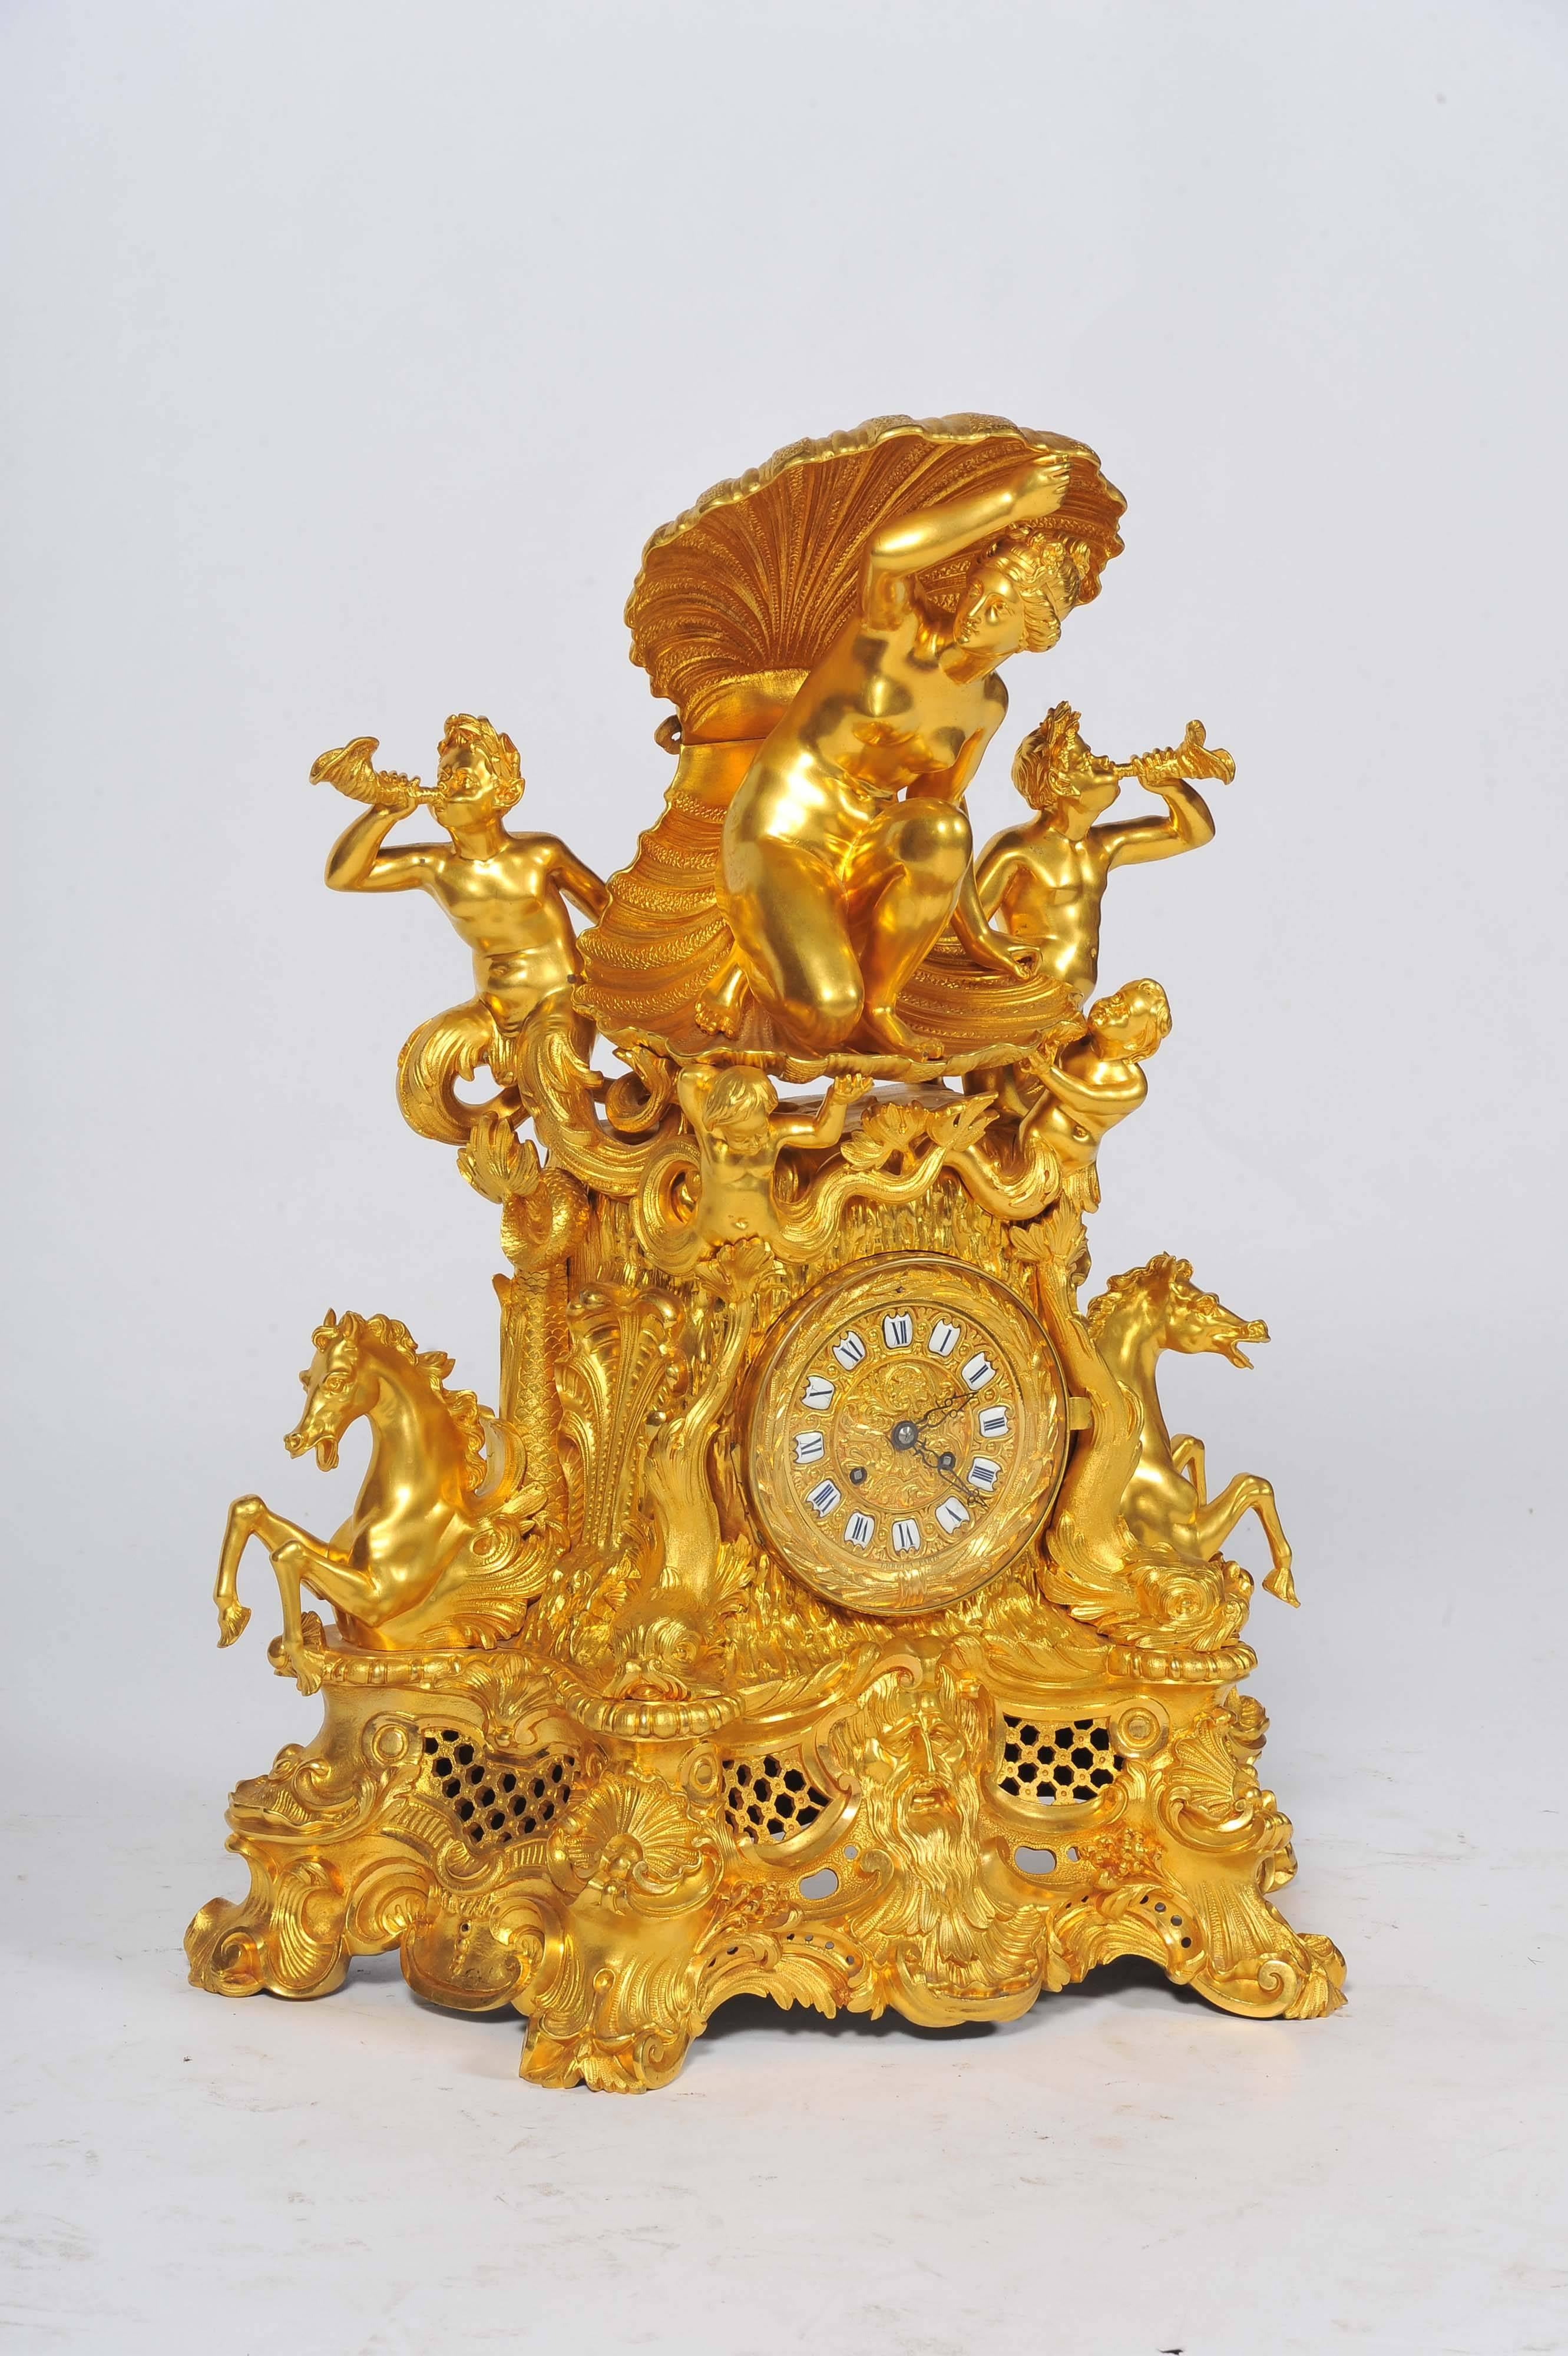 Cast Large 19th Century French Mantel Clock